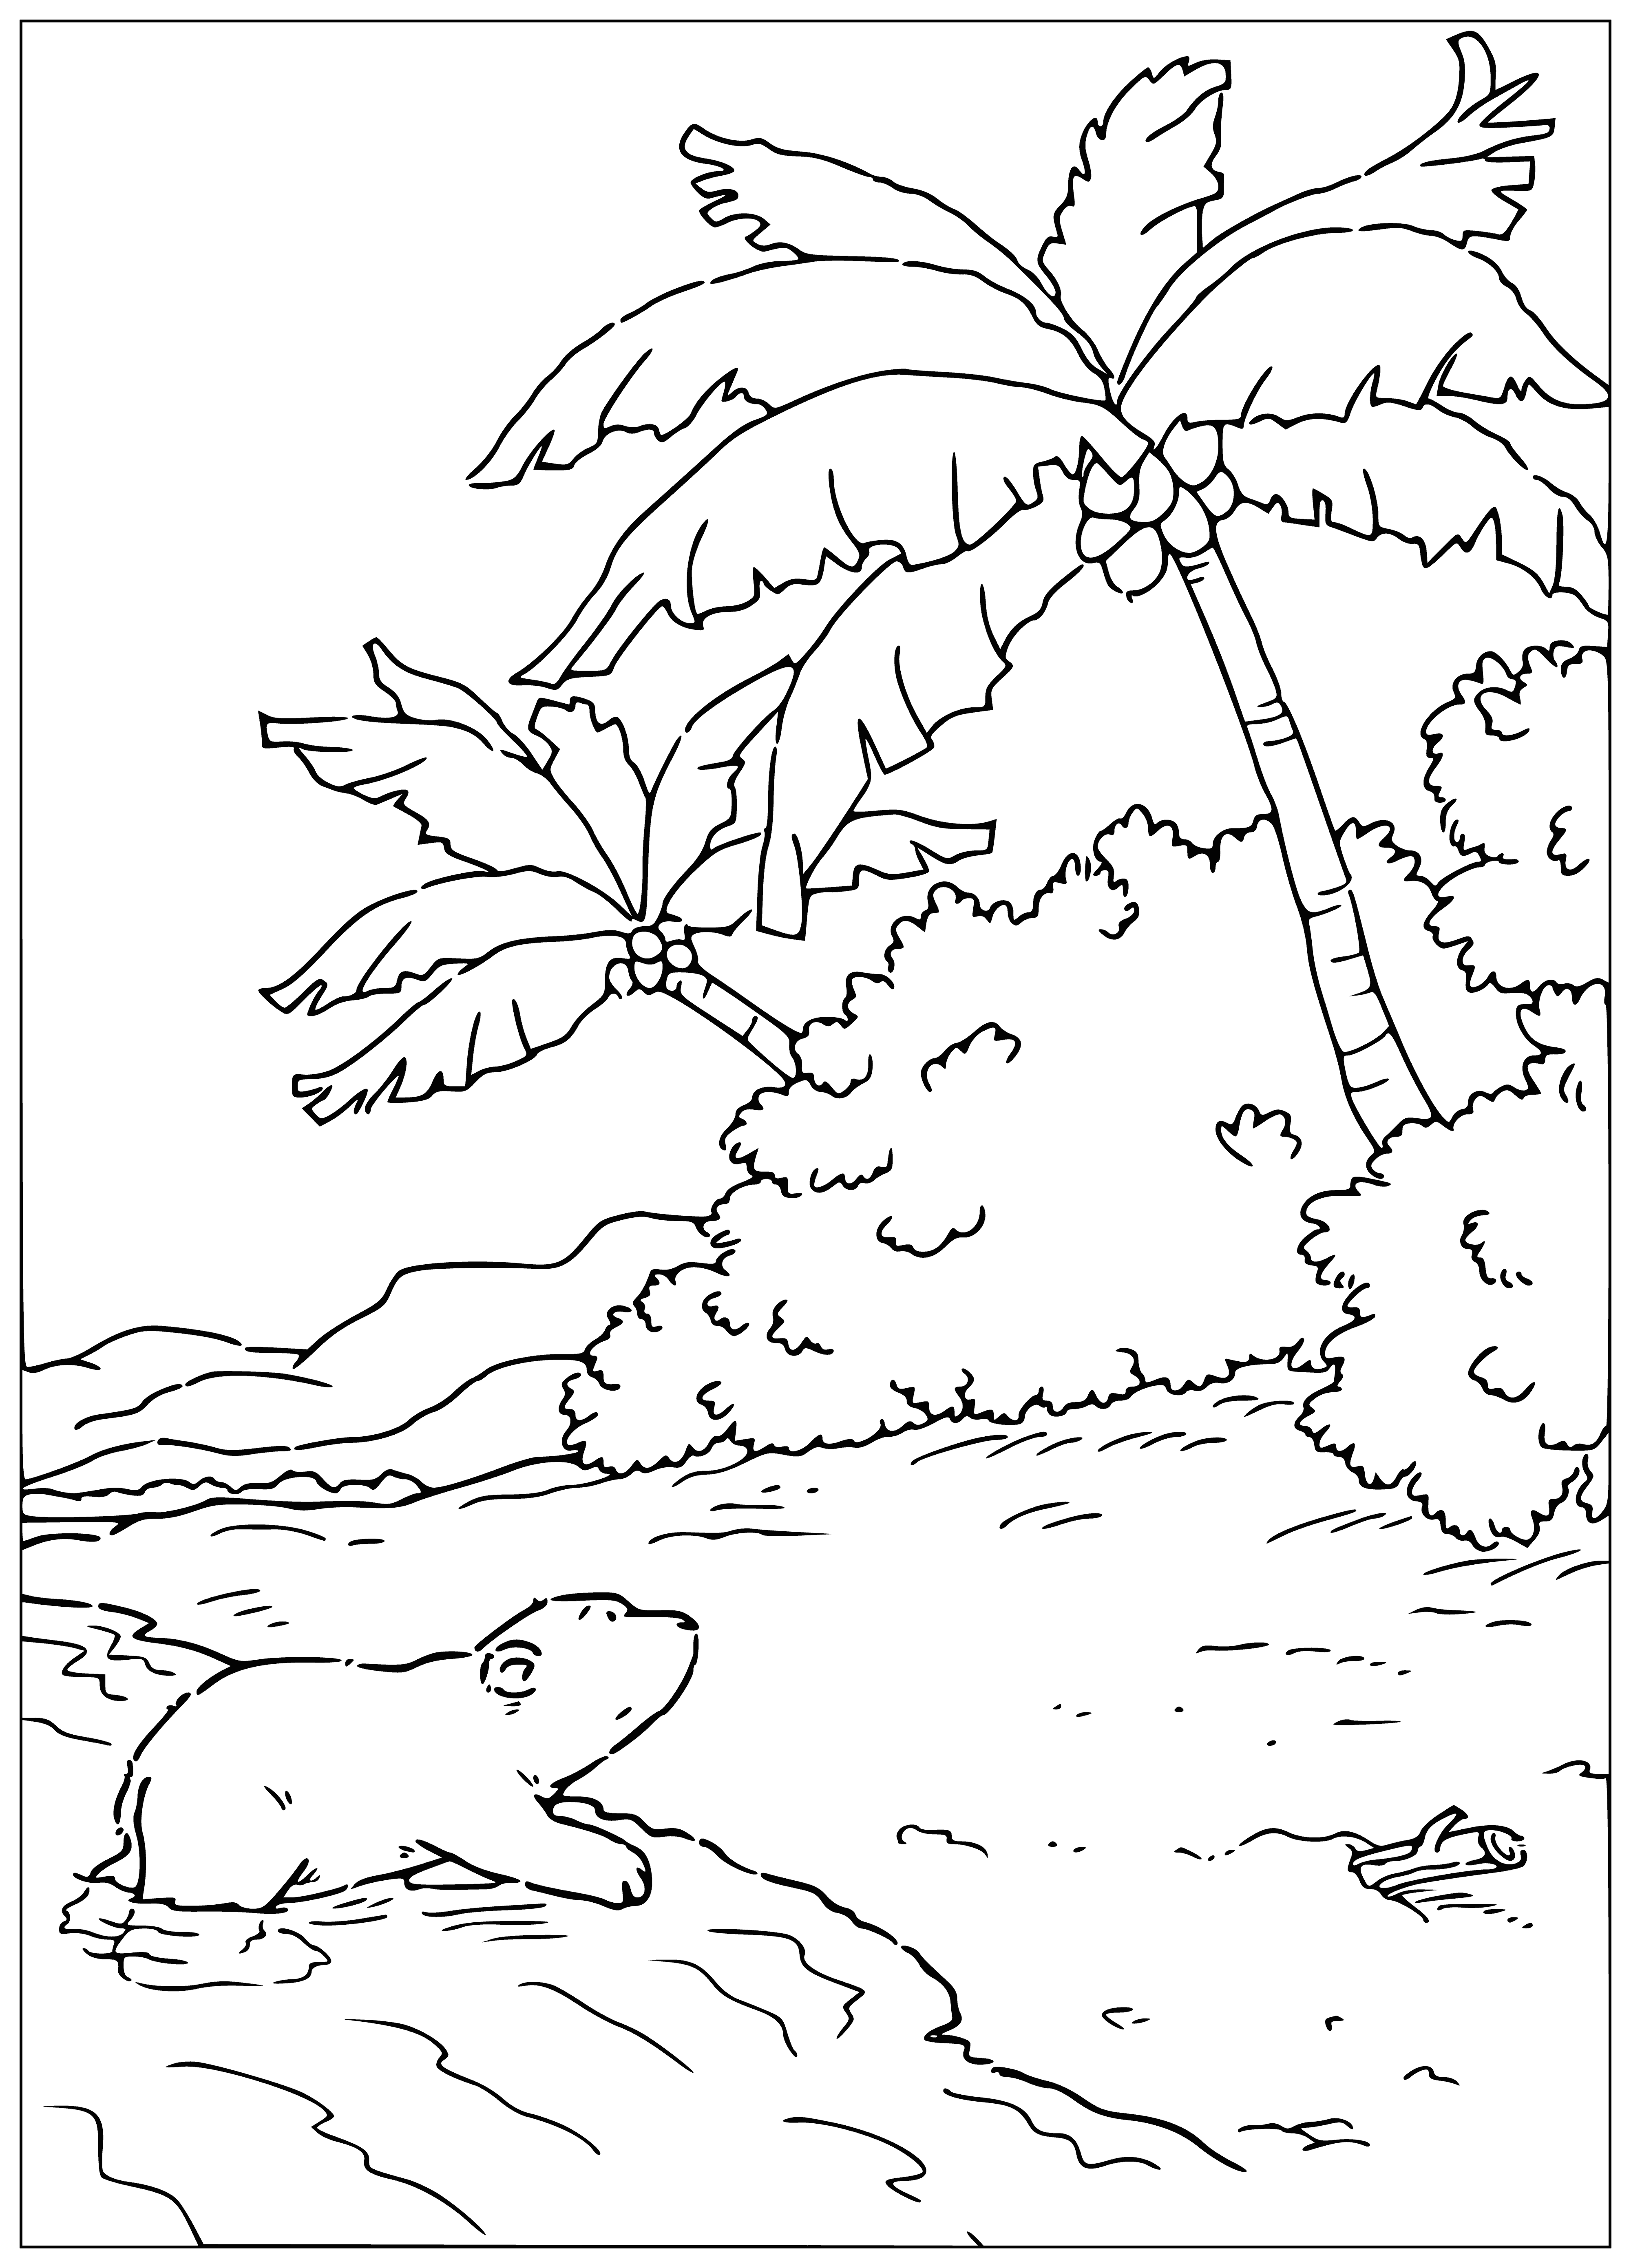 coloring page: Little polar bear sailing on blue sailboat in bright sky. Wearing blue life jacket and striped hat. #dreamvacation